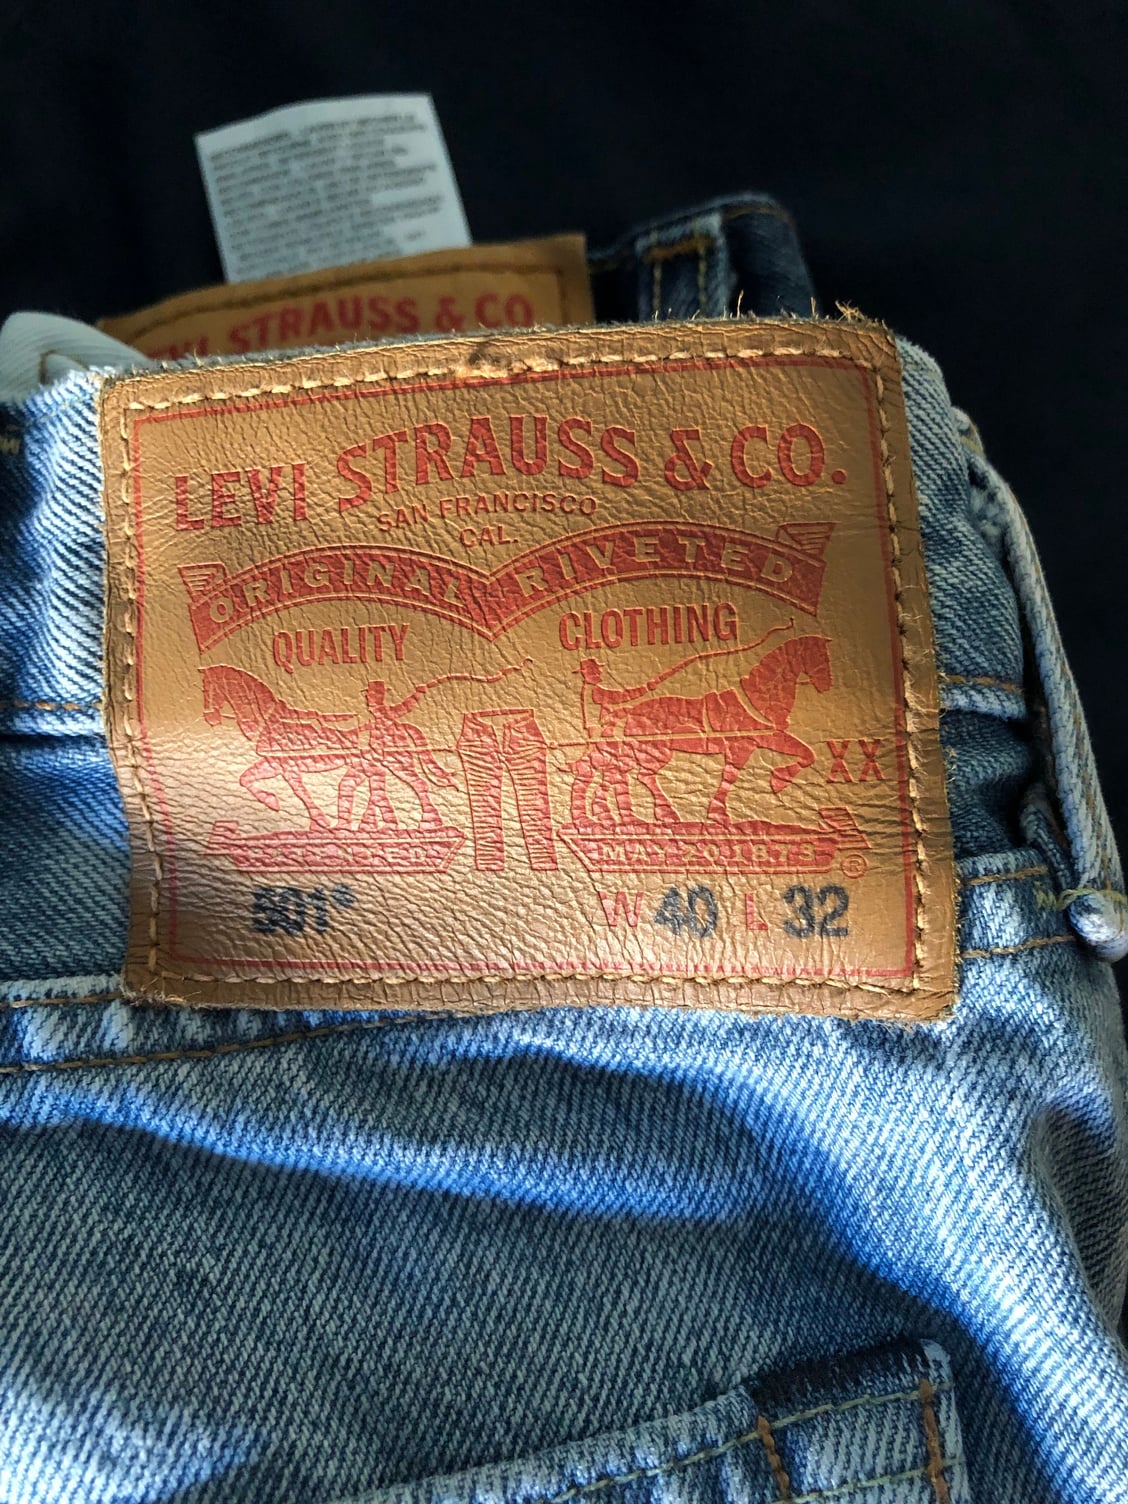 Levis 501 and 550 jeans new - Harley Davidson Forums